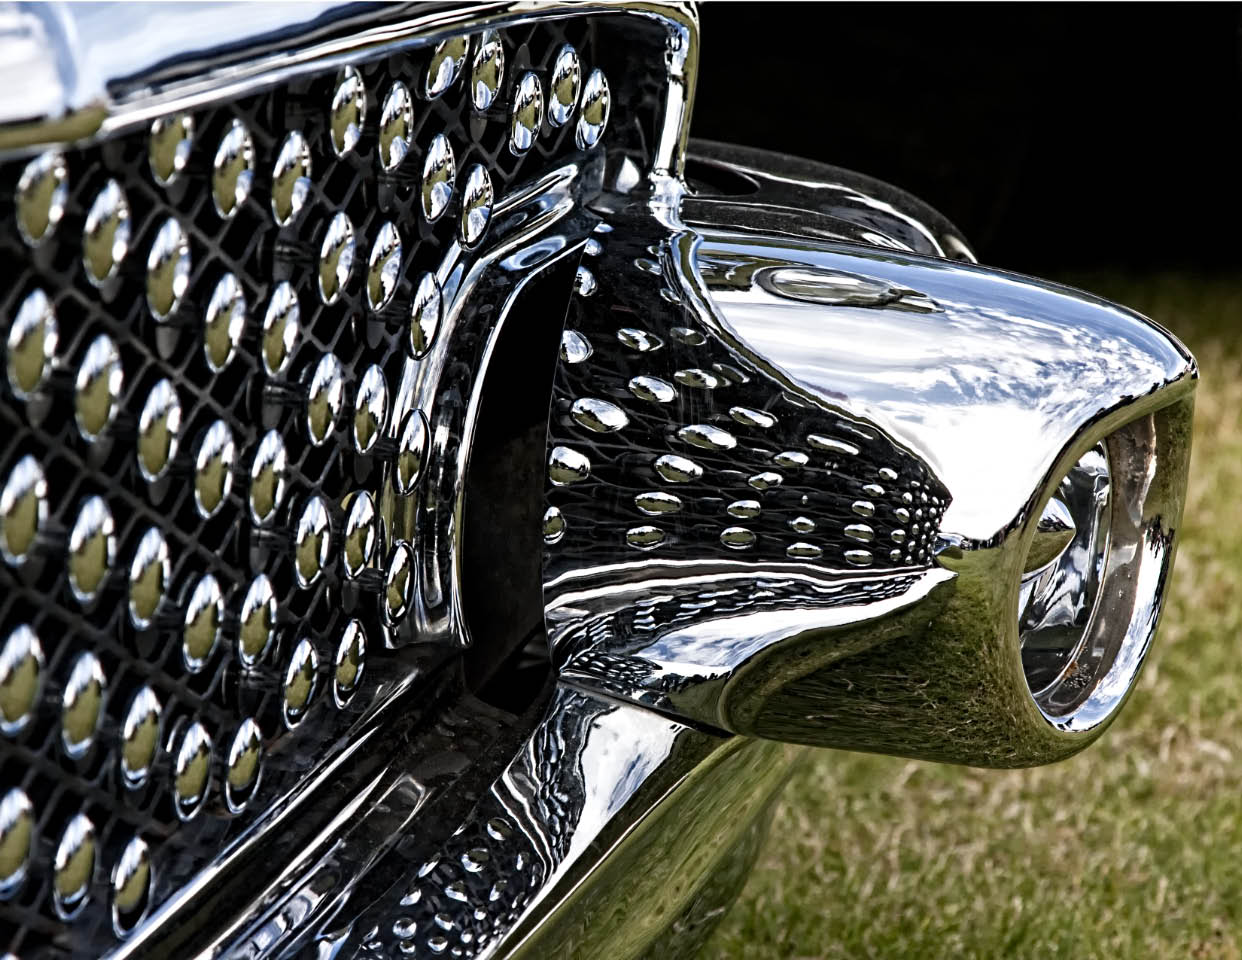 56 Buick Grill- Up Close